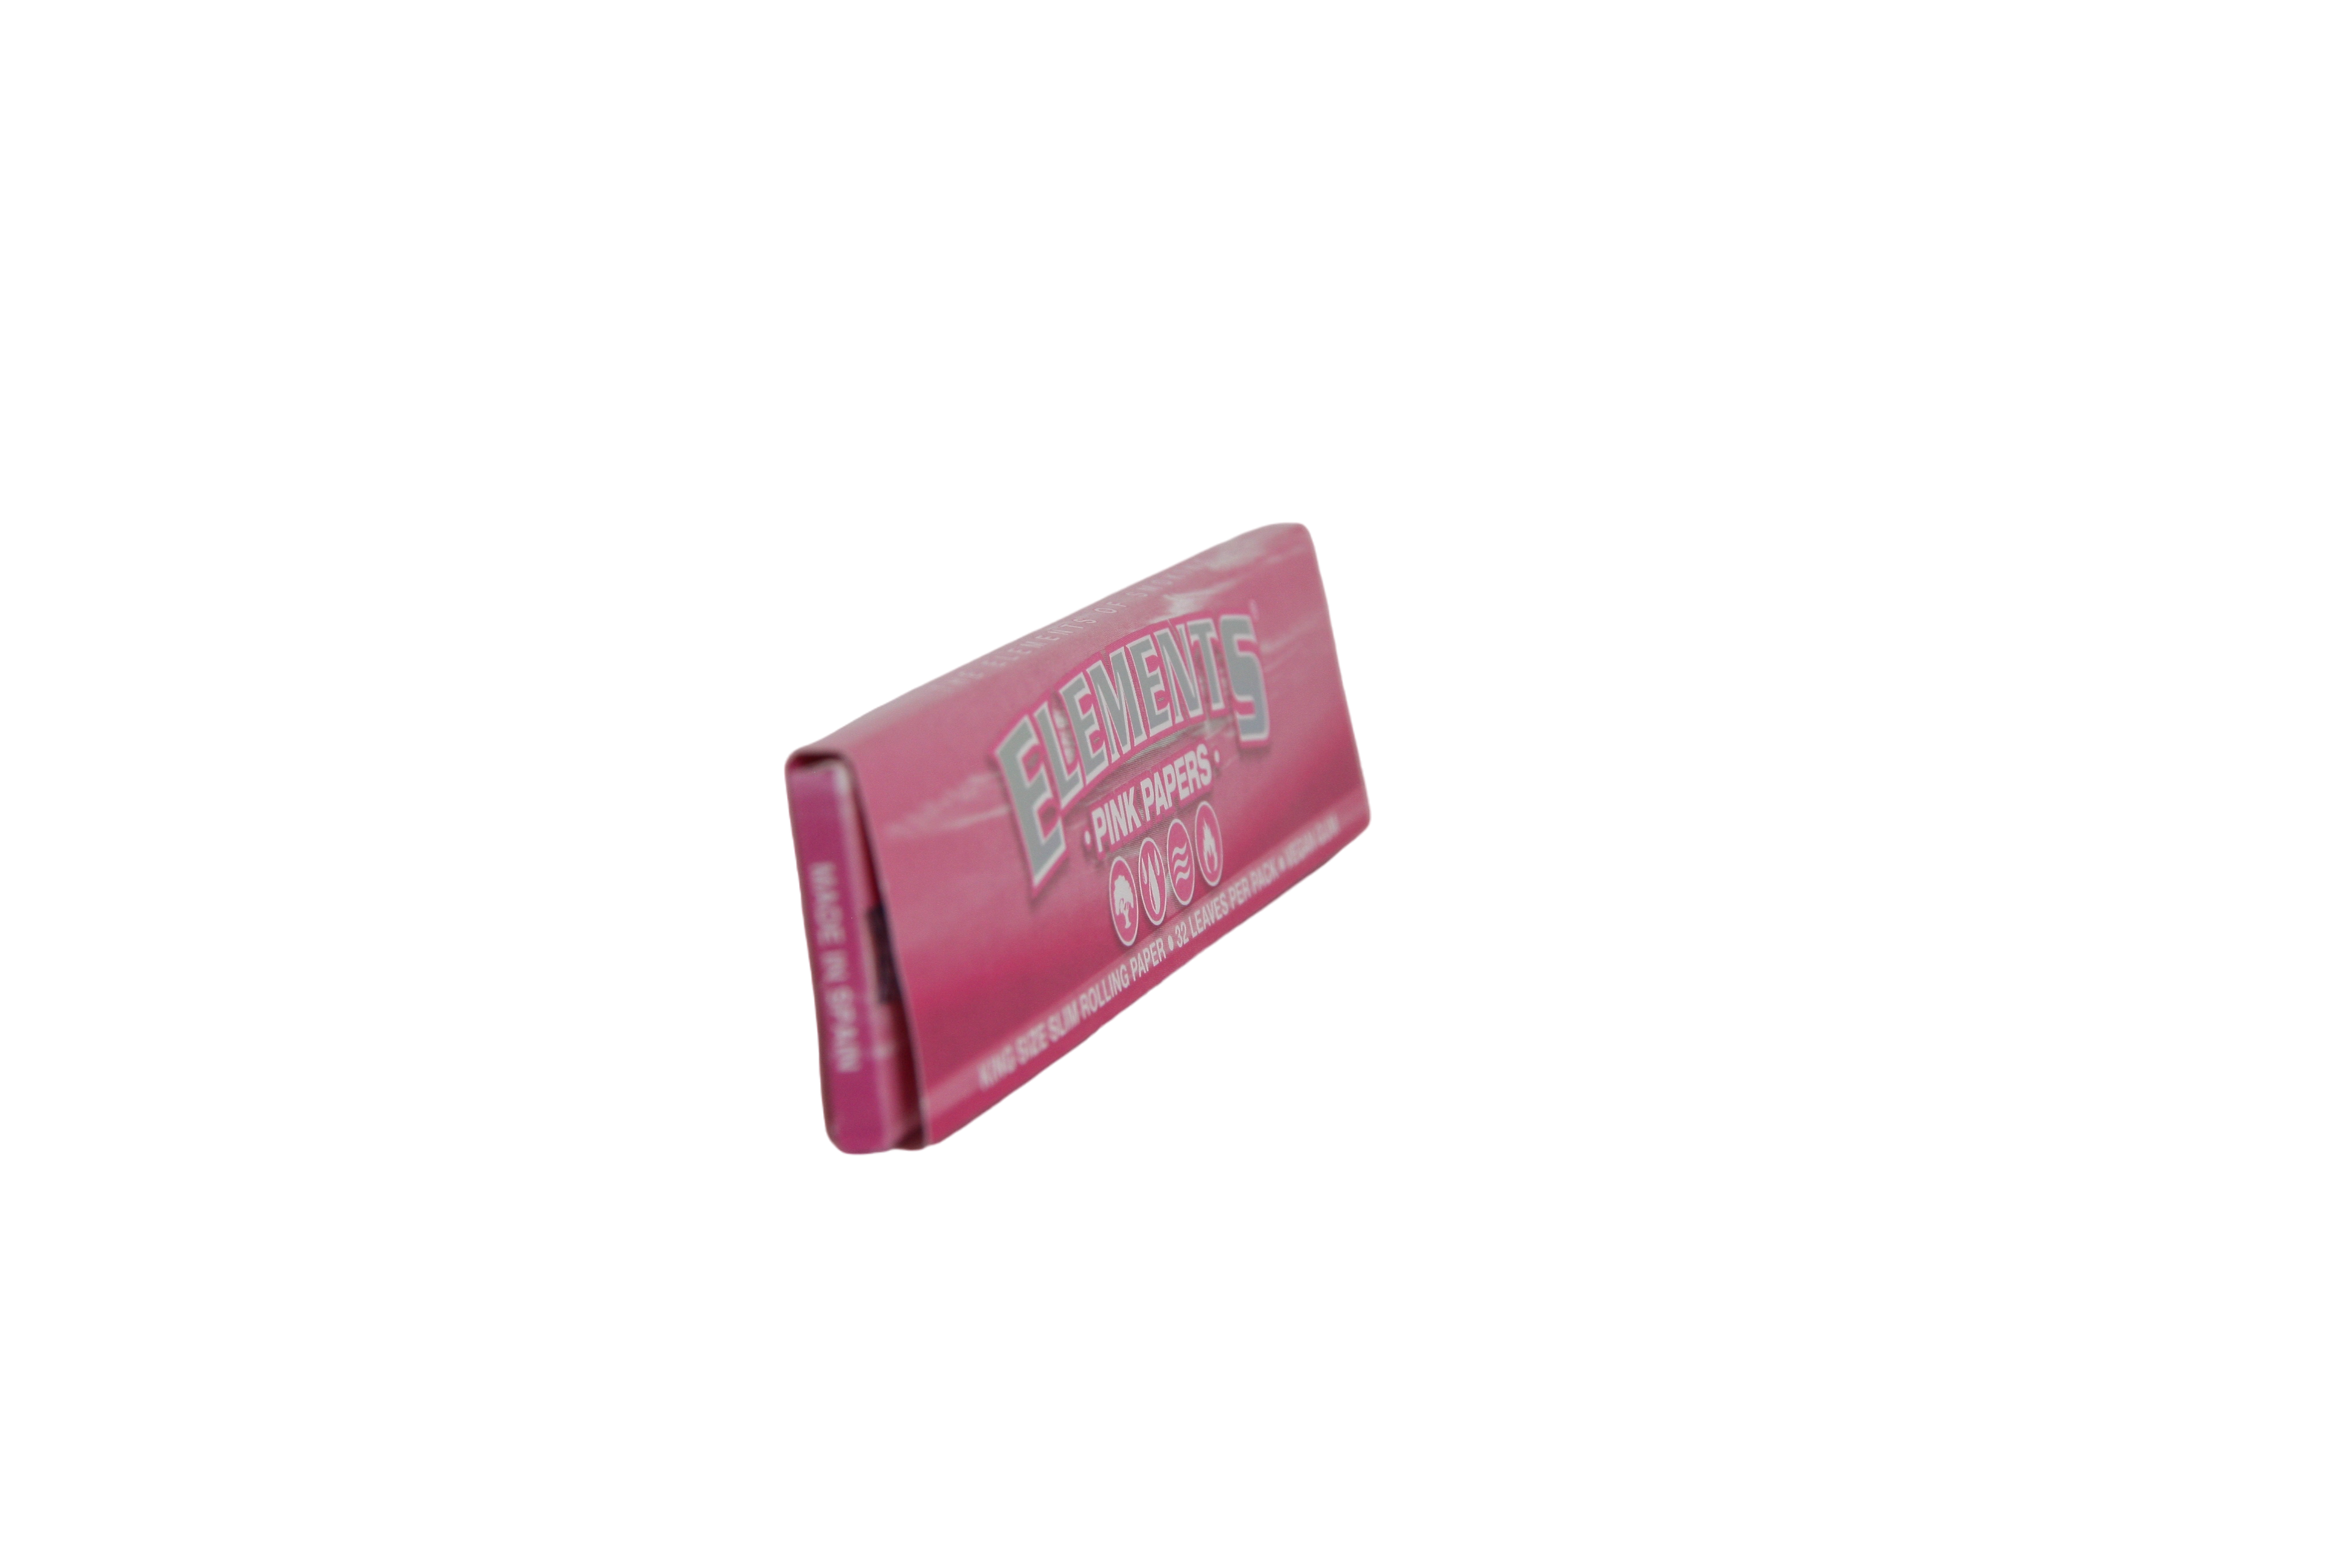 Elements Pink Papers - King Size